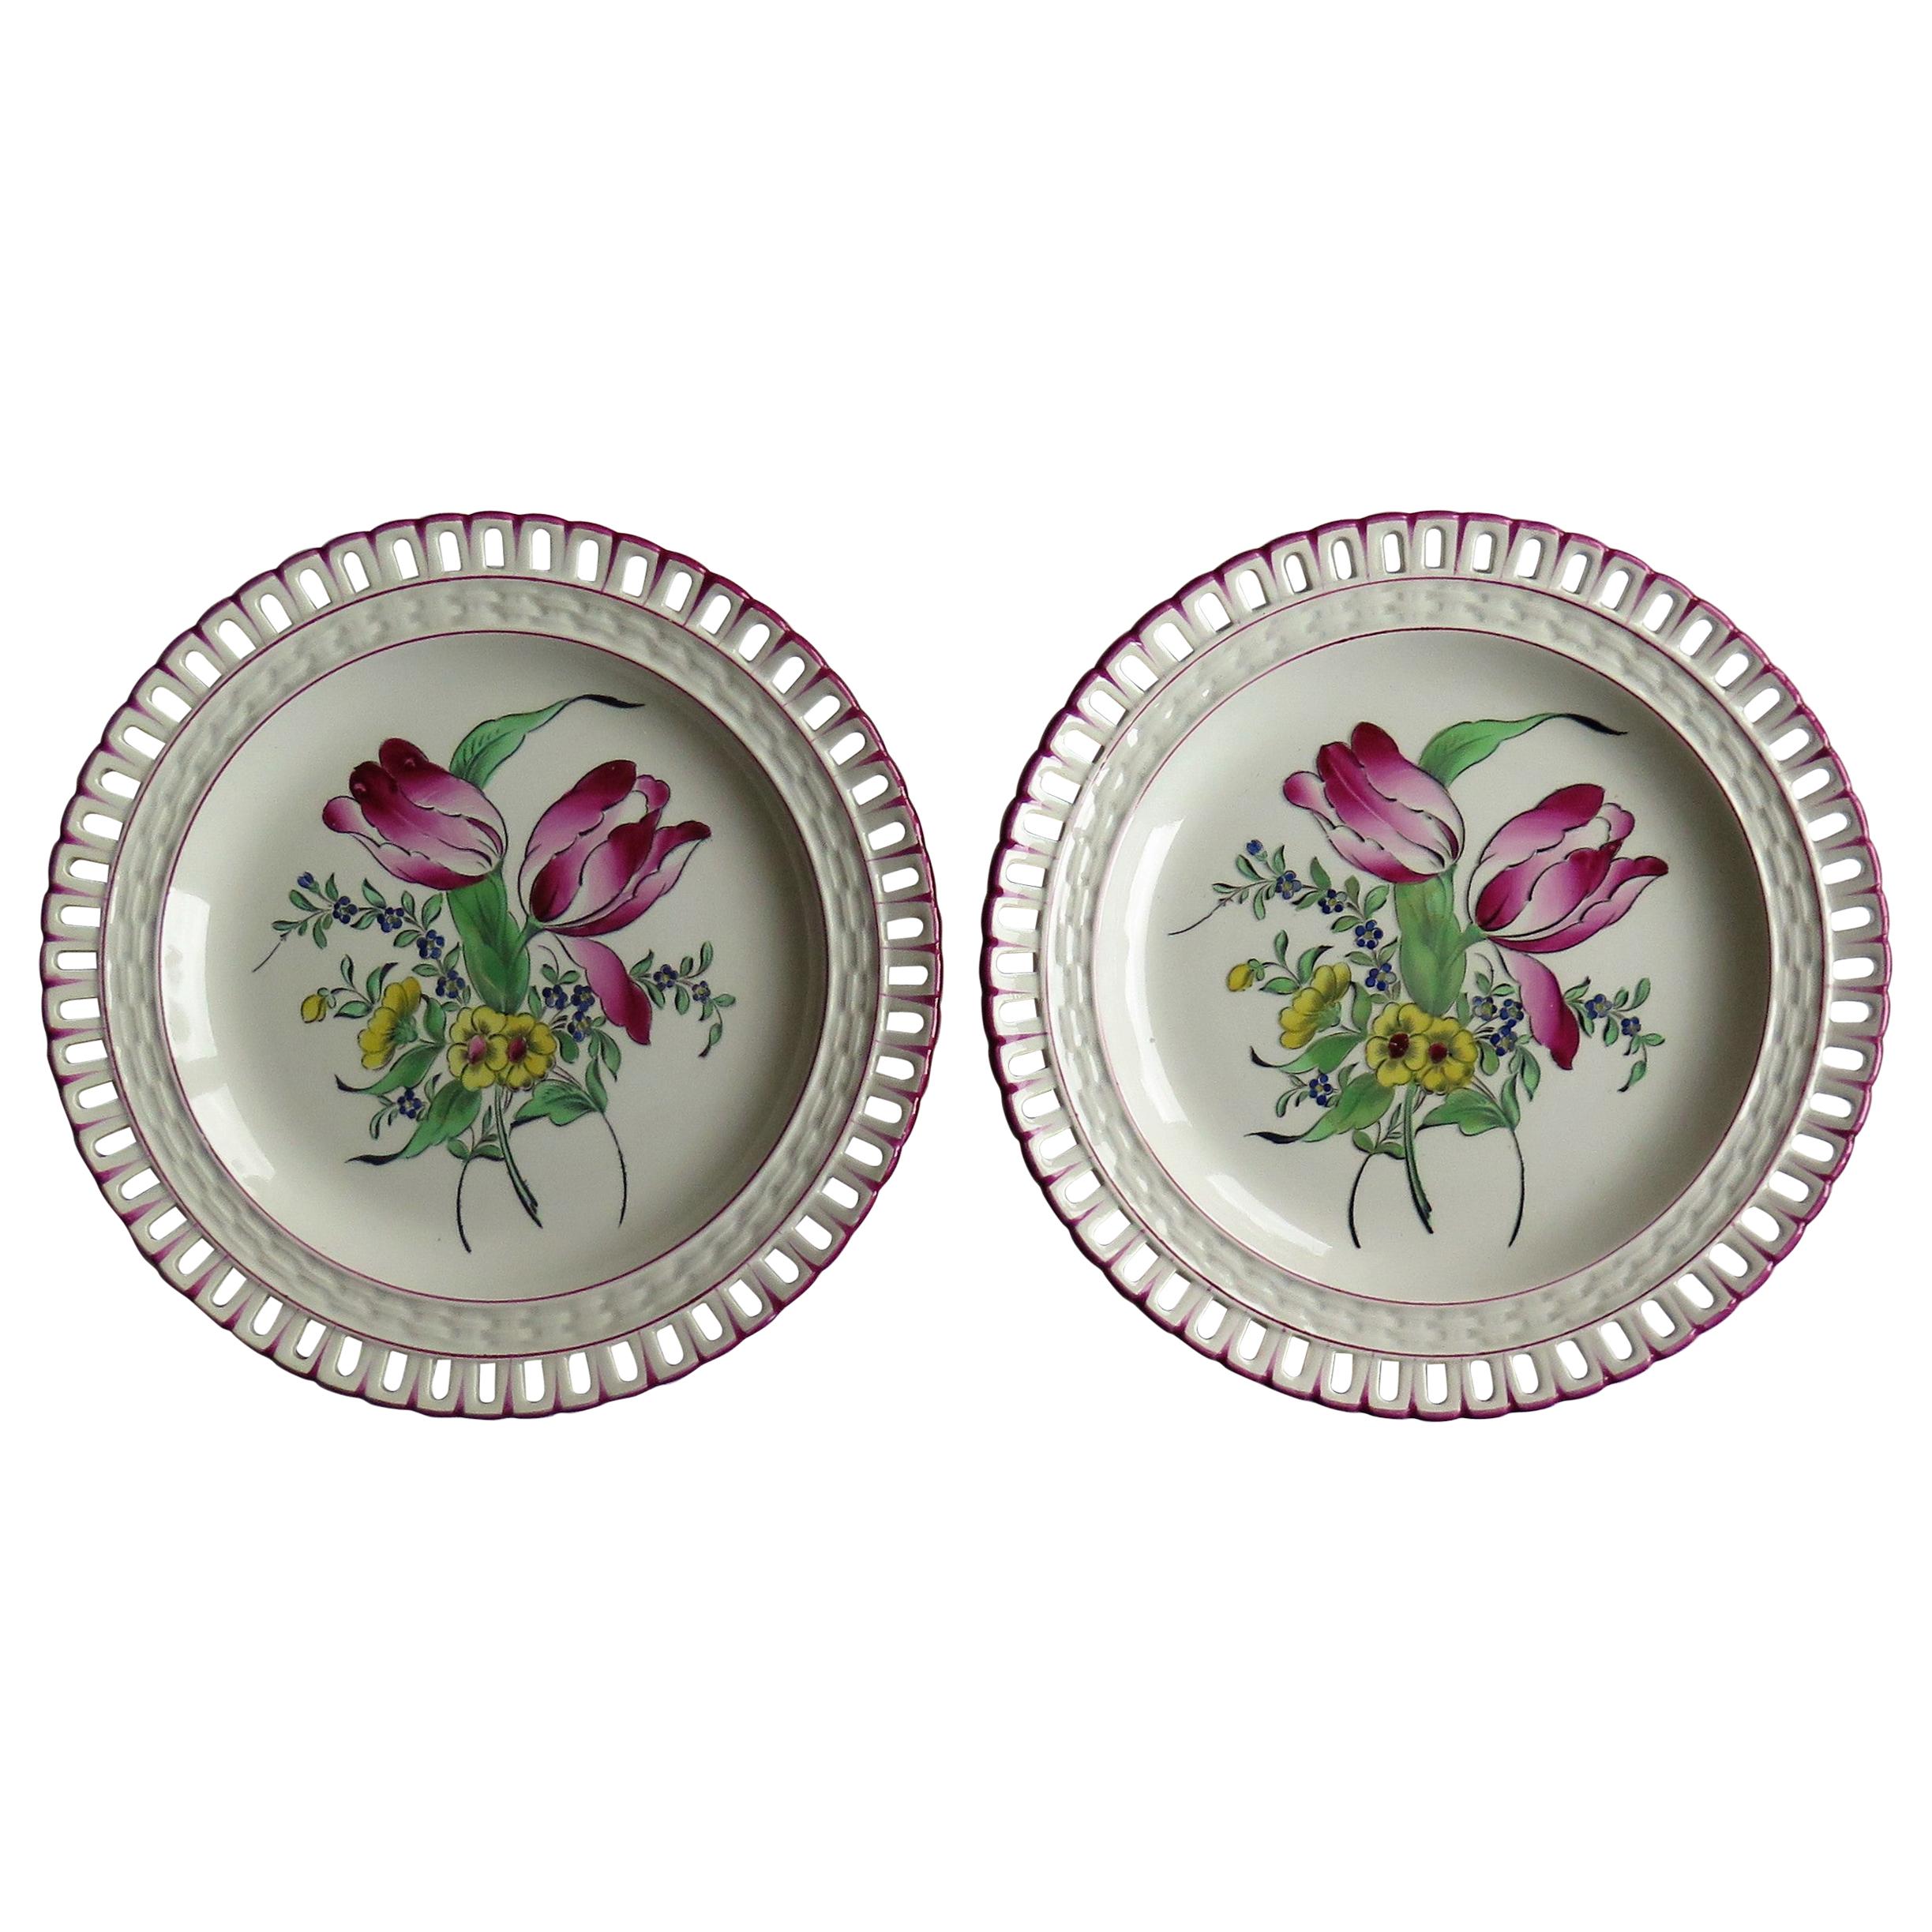 PAIR of French K&G Luneville Faience Plates Hand Painted Flowers, circa 1895 For Sale